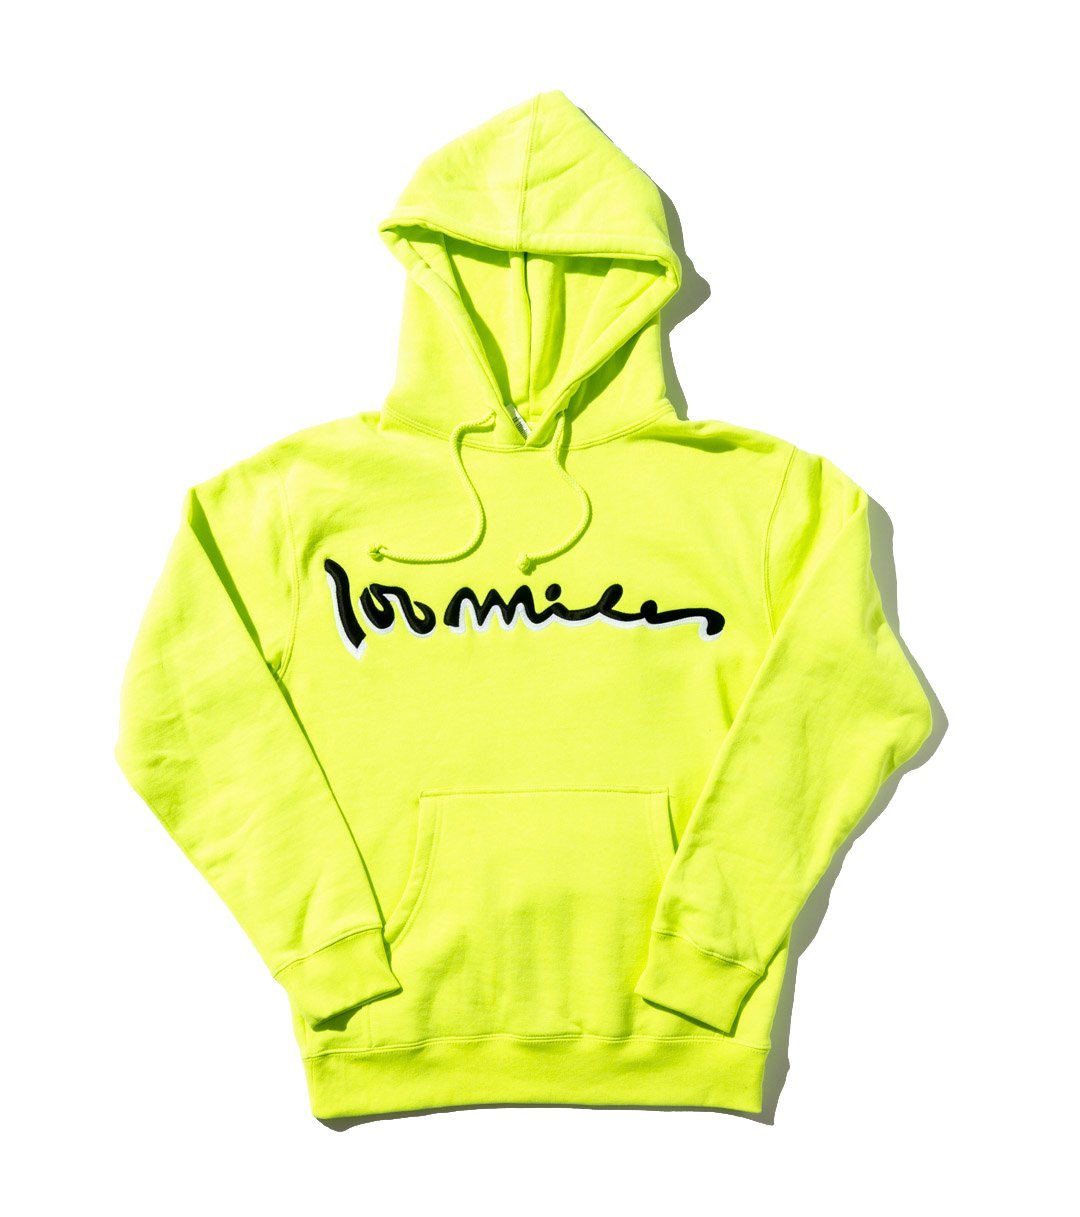 100 MILES SIGNATURE HOODIE SAFETY GREEN